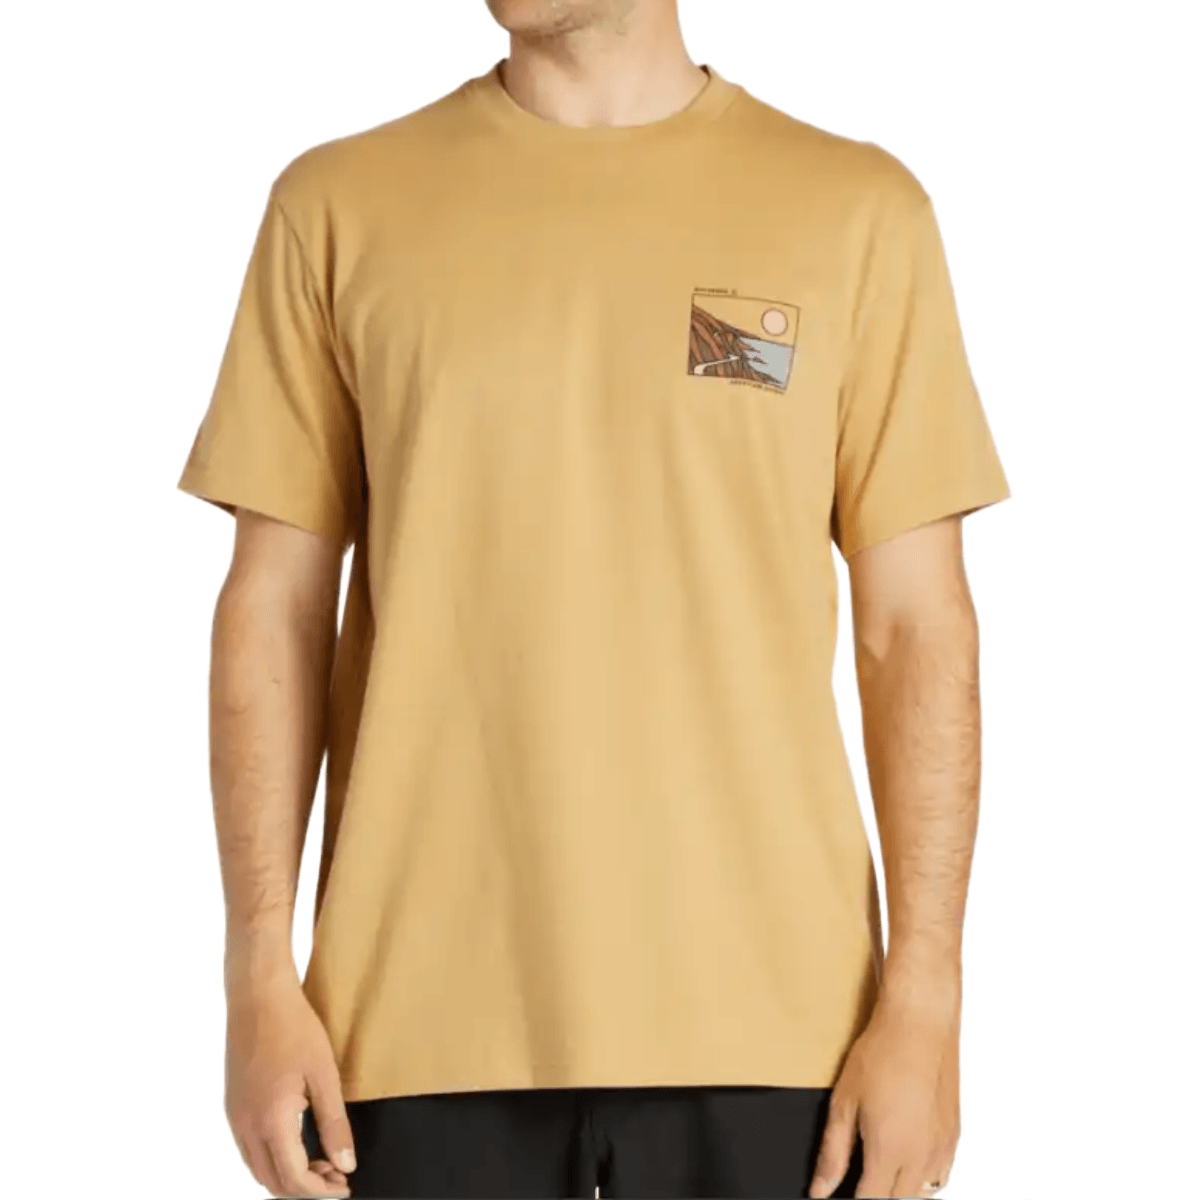 The North Face Short Sleeve Half Dome Crop Tee - Women's